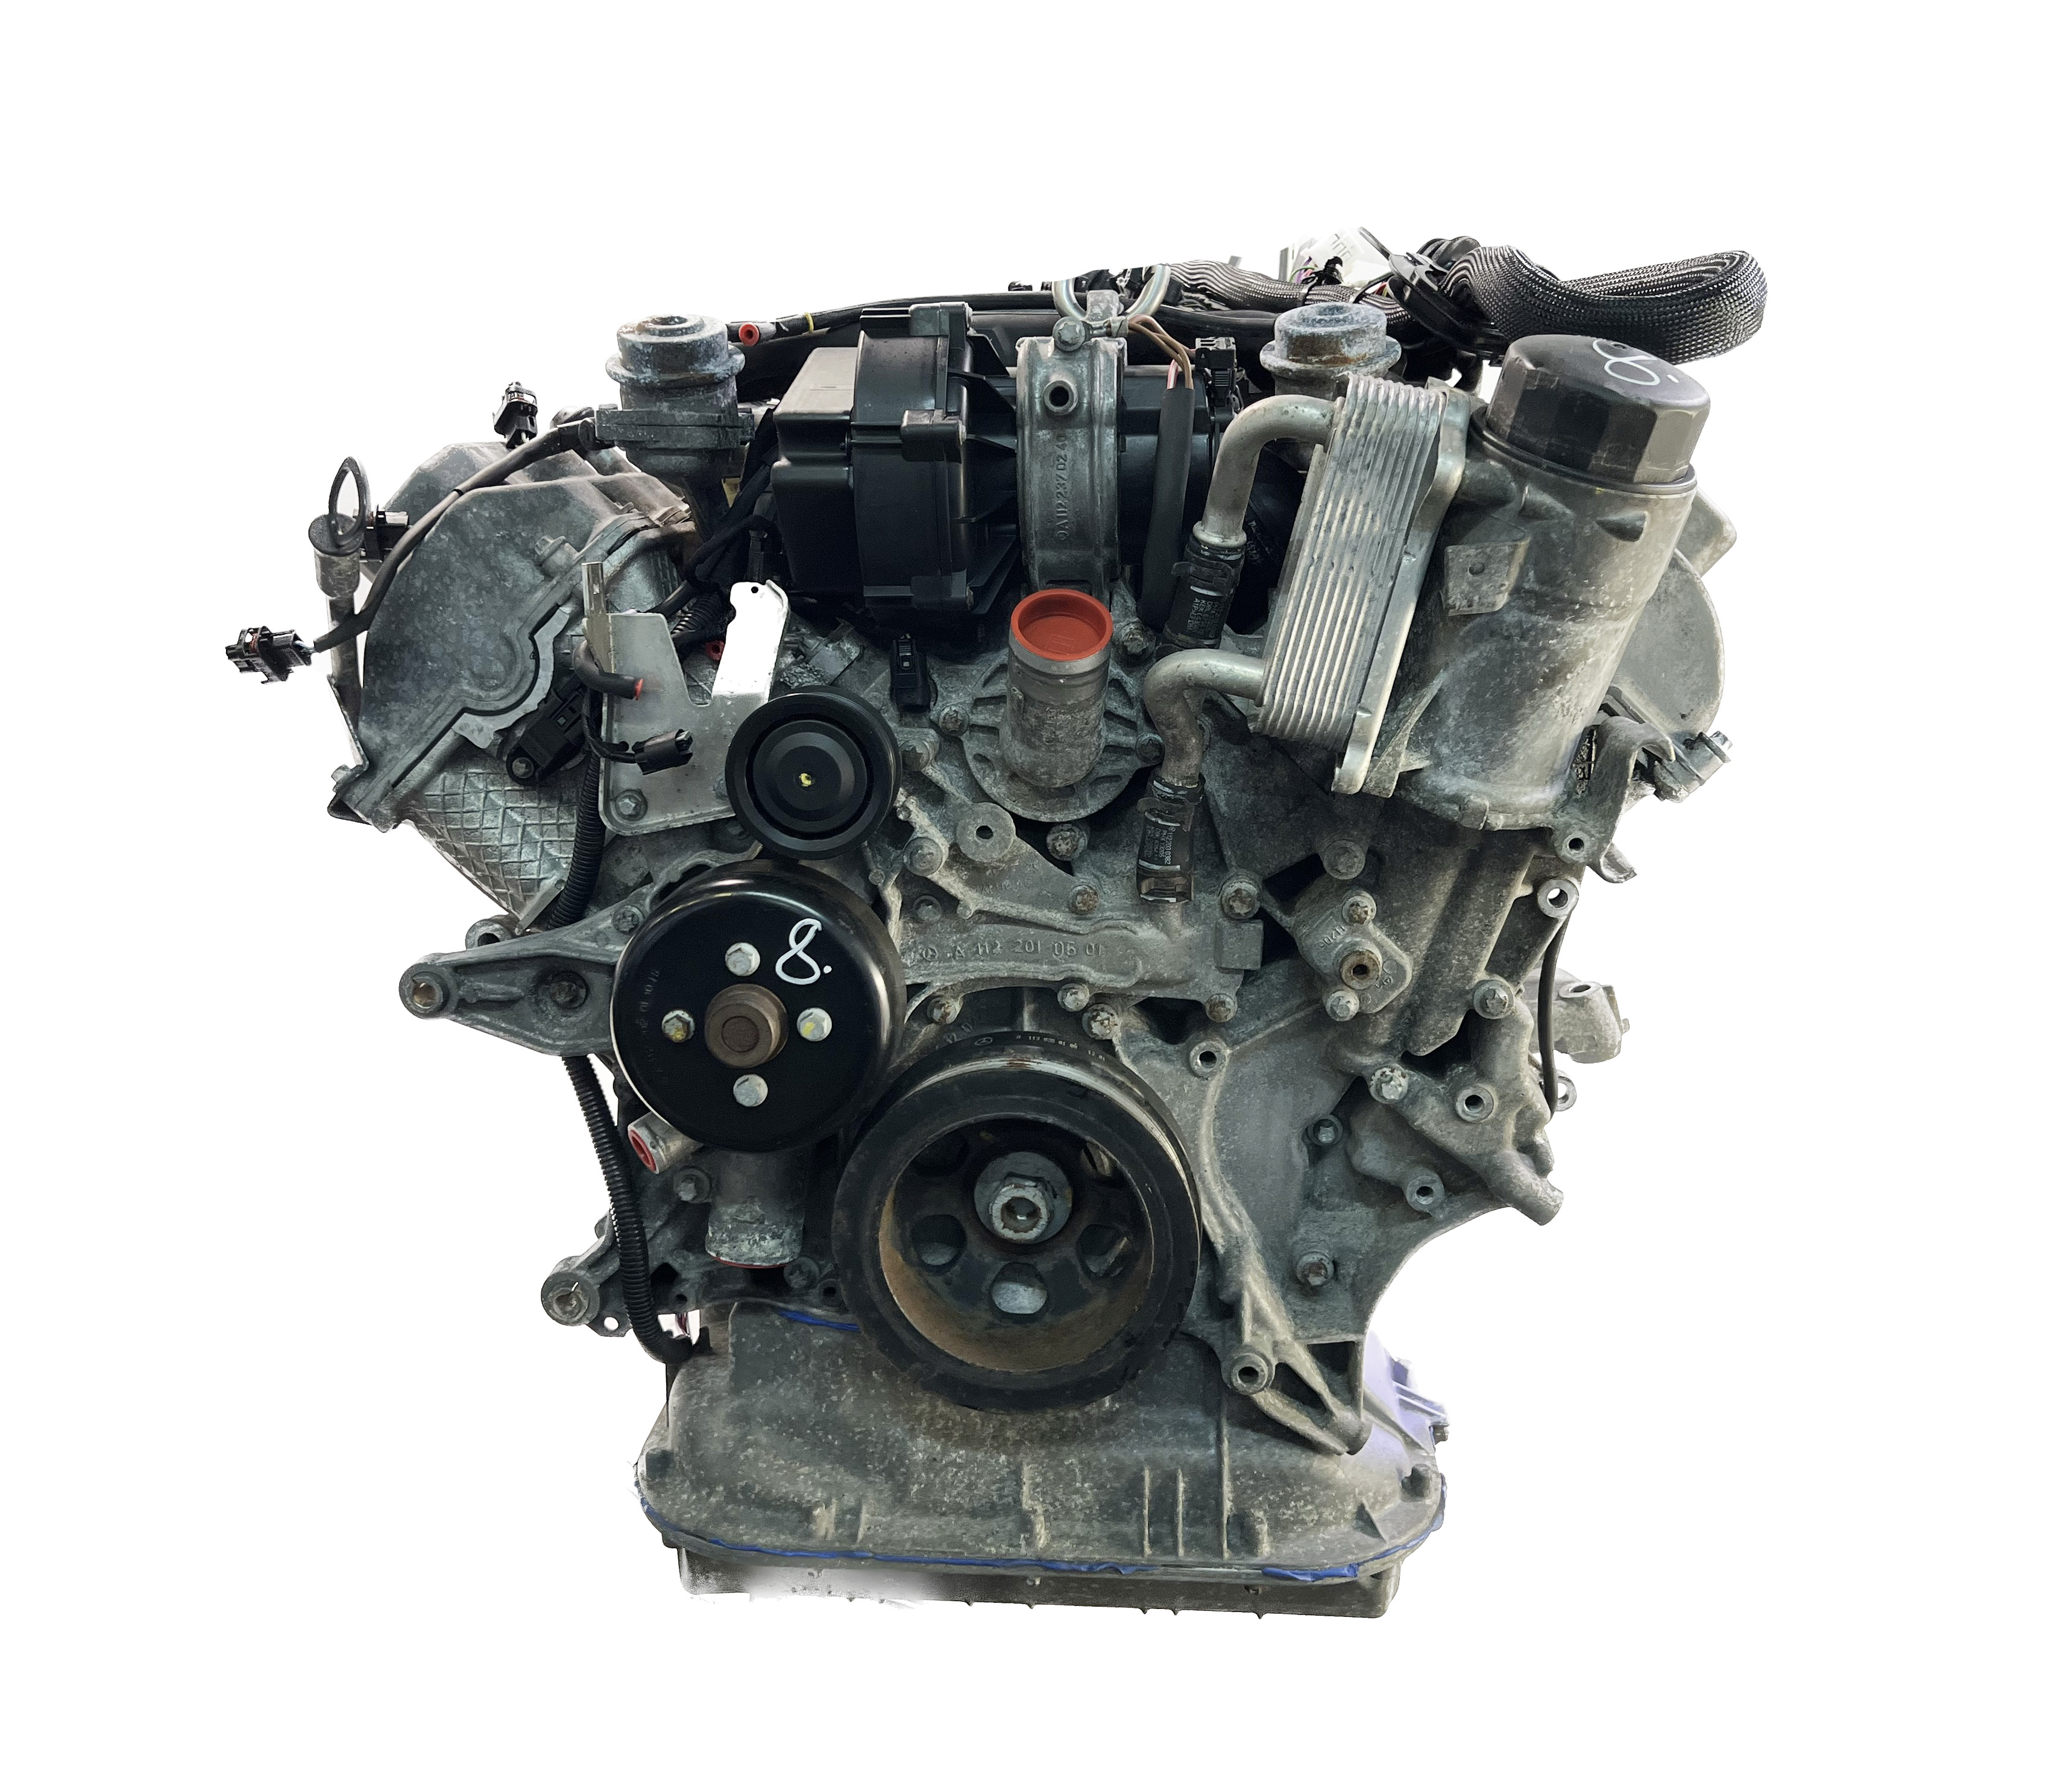 | 55 W220 CL S-Class V8 S for Benz C215 AMG eBay 113.986 M113.986 Mercedes Engine 5.5